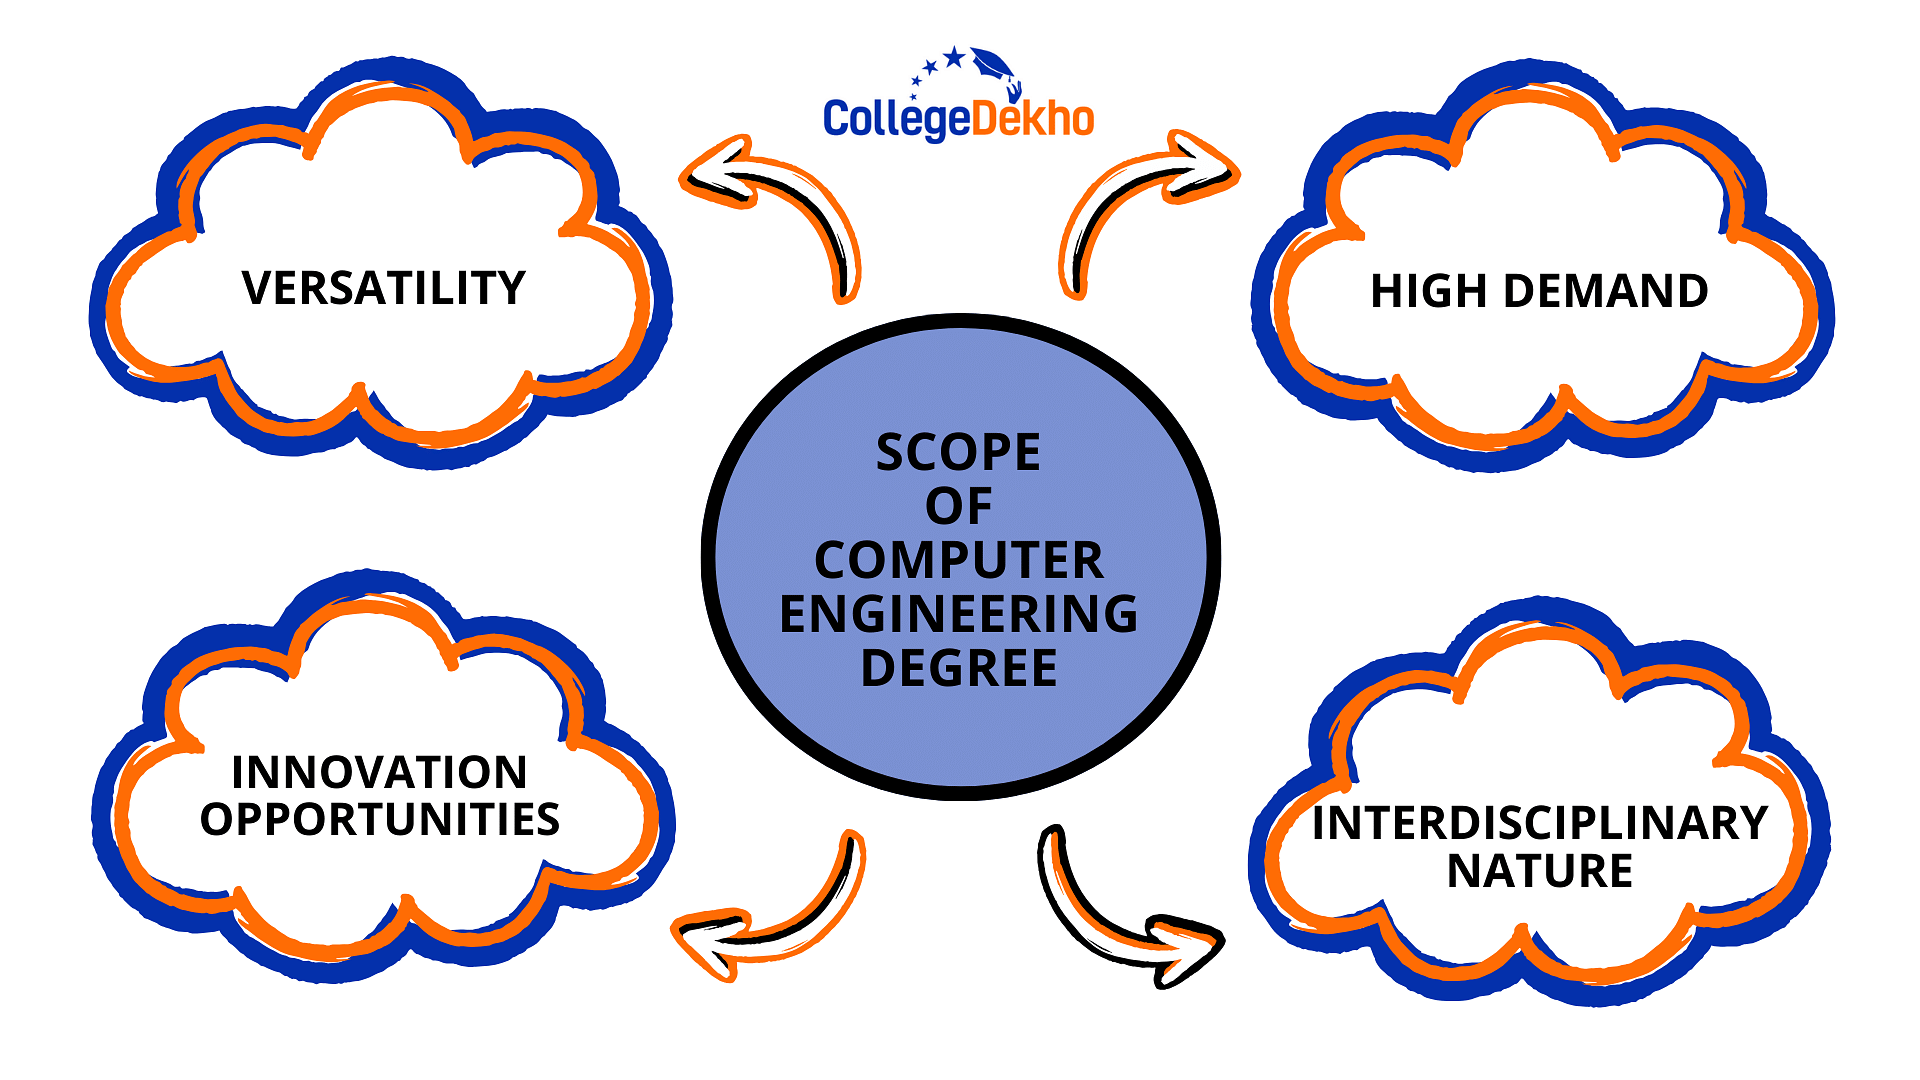 Why Choose a Computer Engineering Degree?